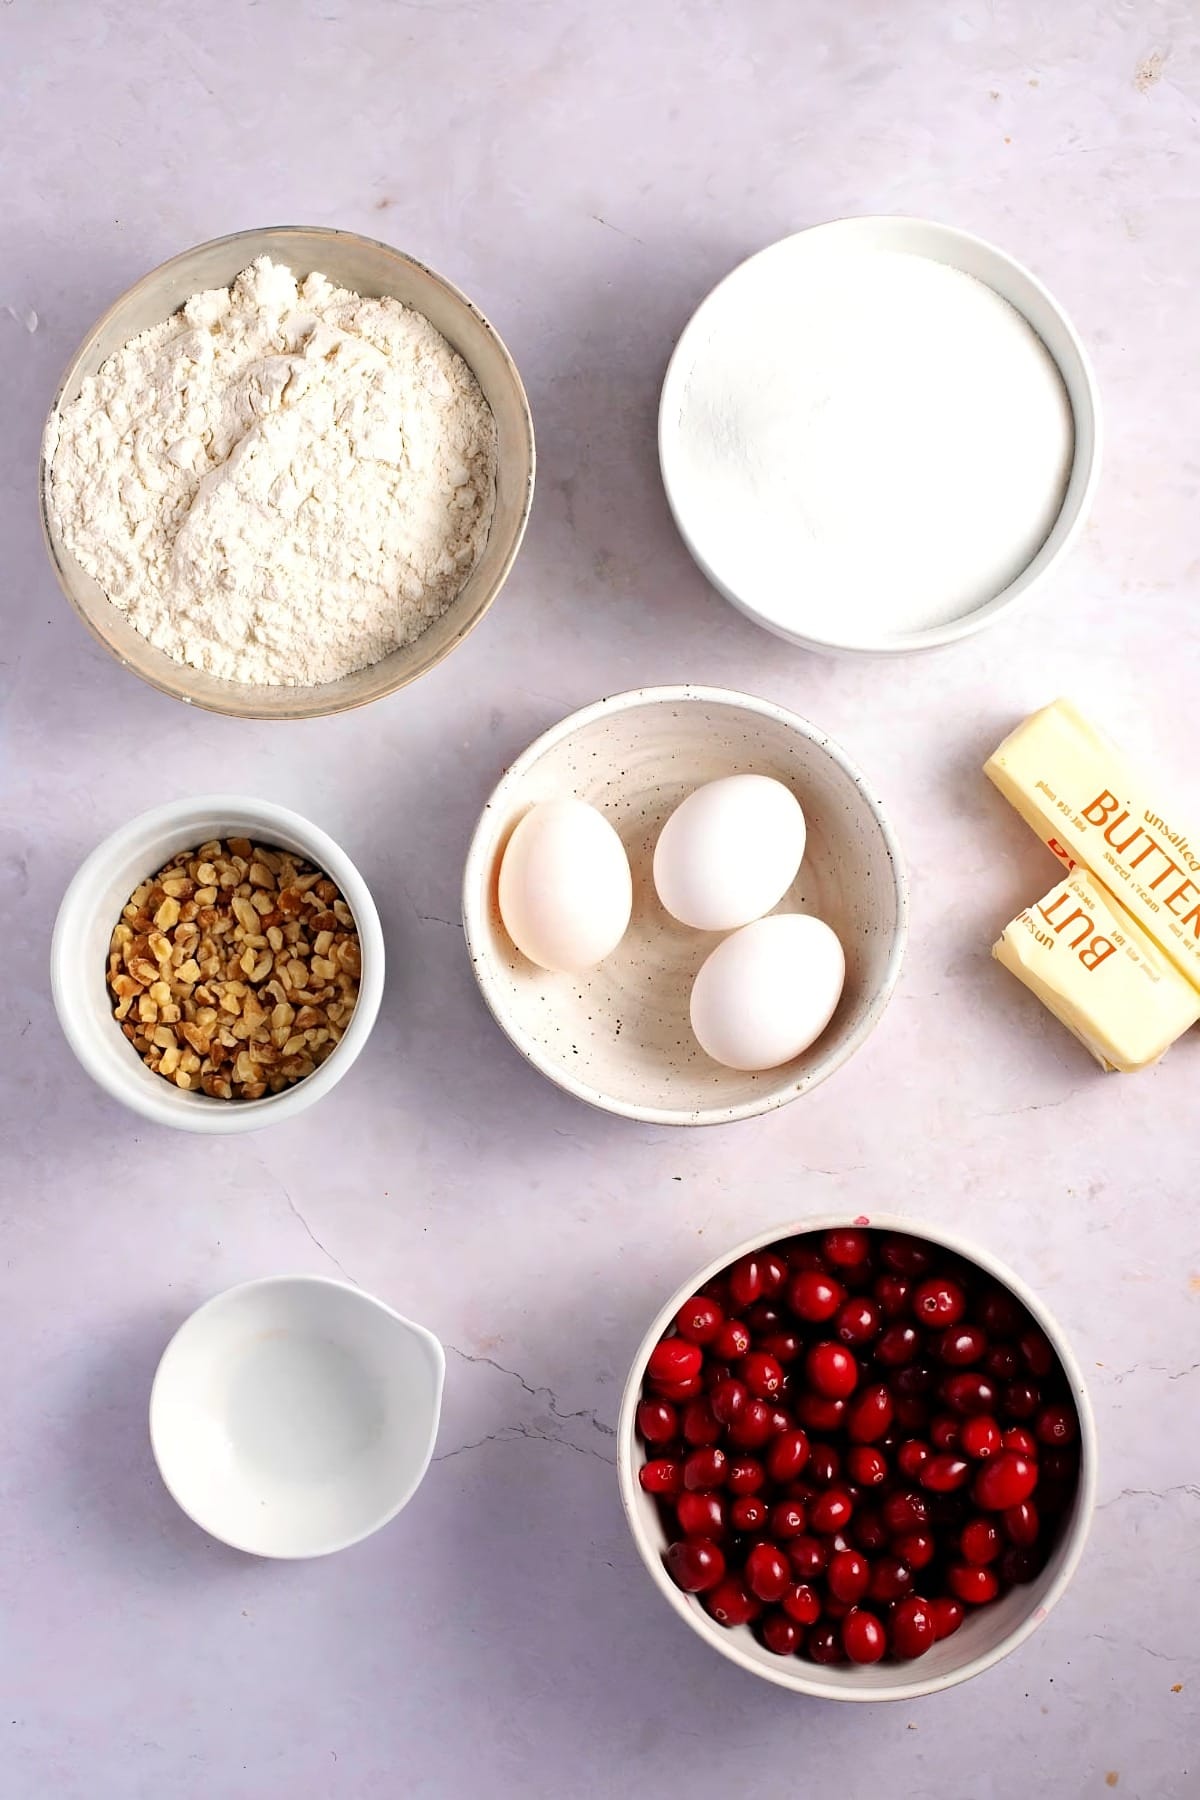 Cranberry Christmas Cake Ingredients - Eggs, Sugar, Butter, Almond Extract, Flour, Cranberries, Chopped Pecans and Whipped Cream